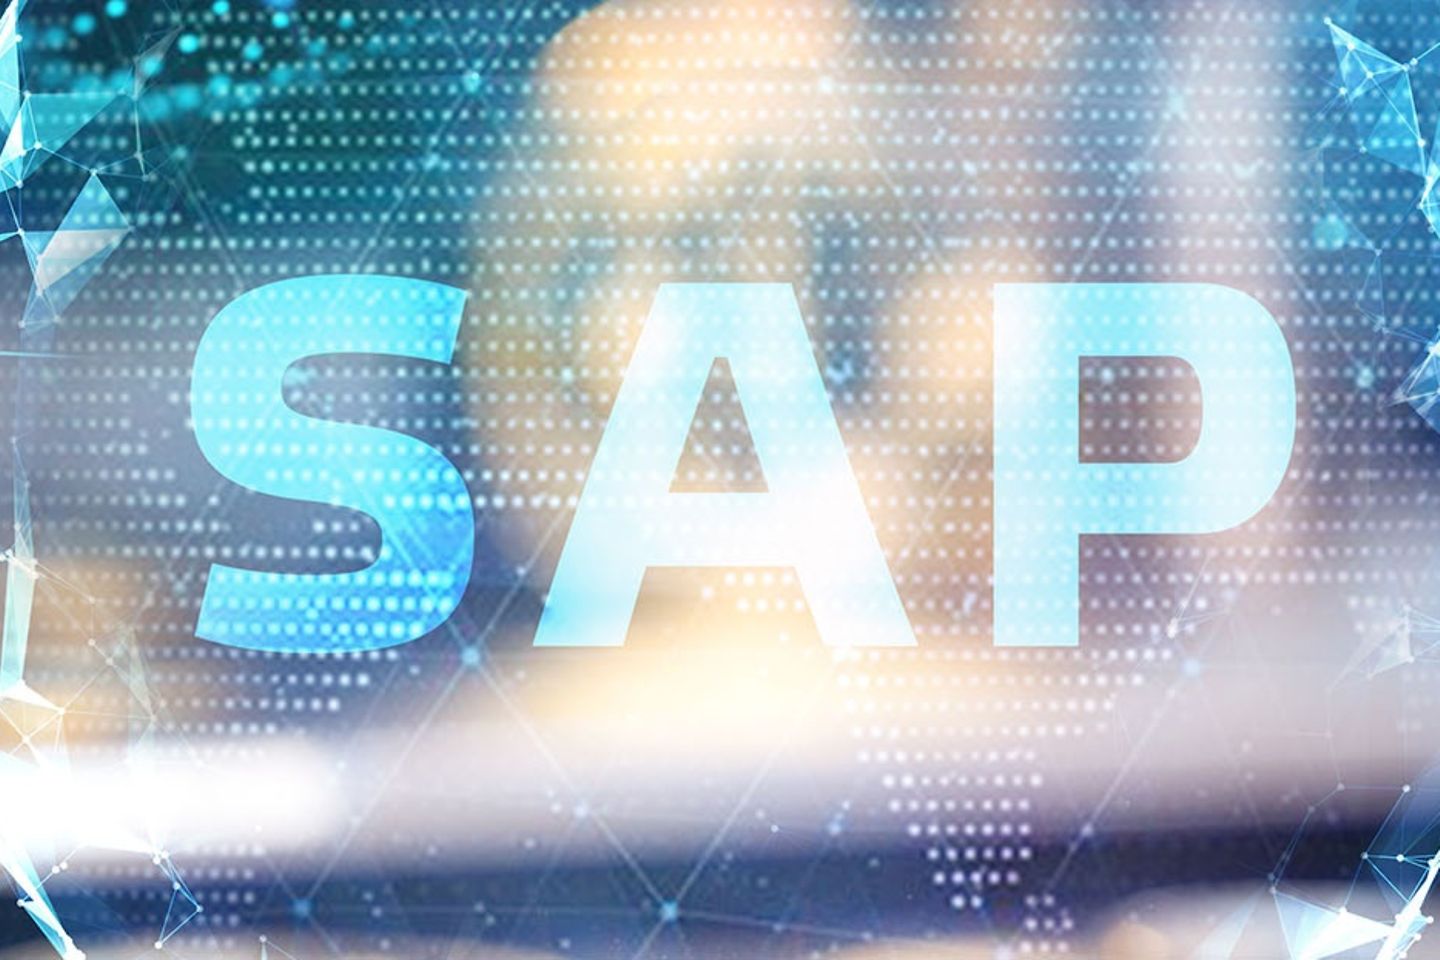 A virtual representation of points connected by lines and the SAP logo.